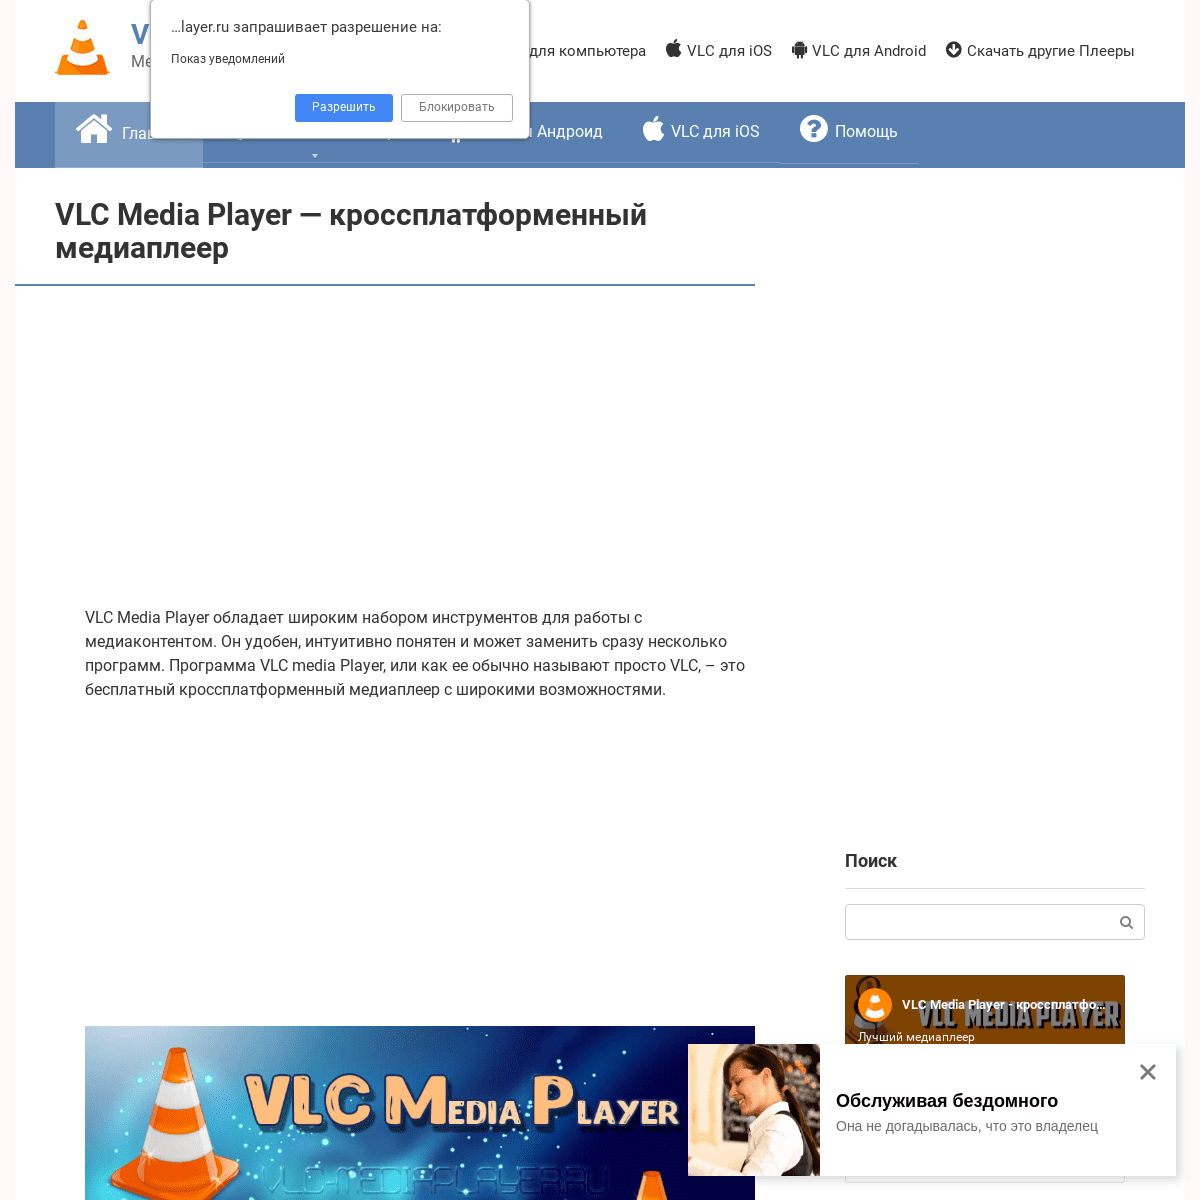 A complete backup of vlc-mediaplayer.ru